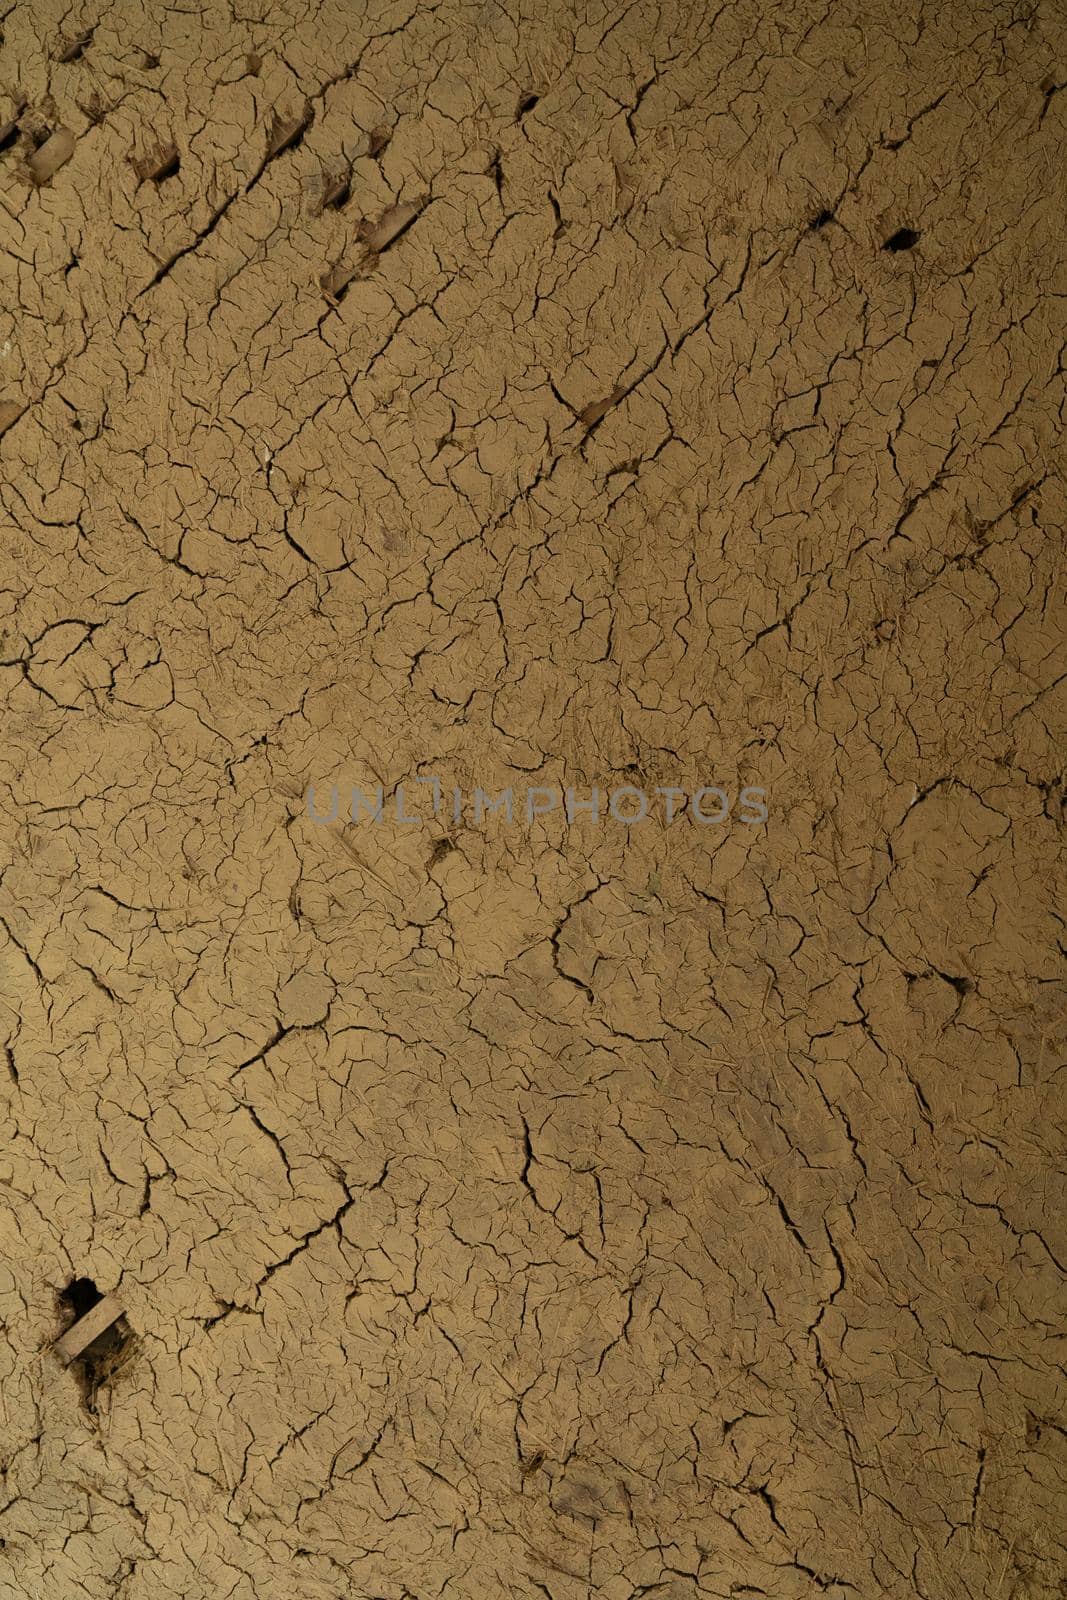 Cracked dry clay wall texture or background